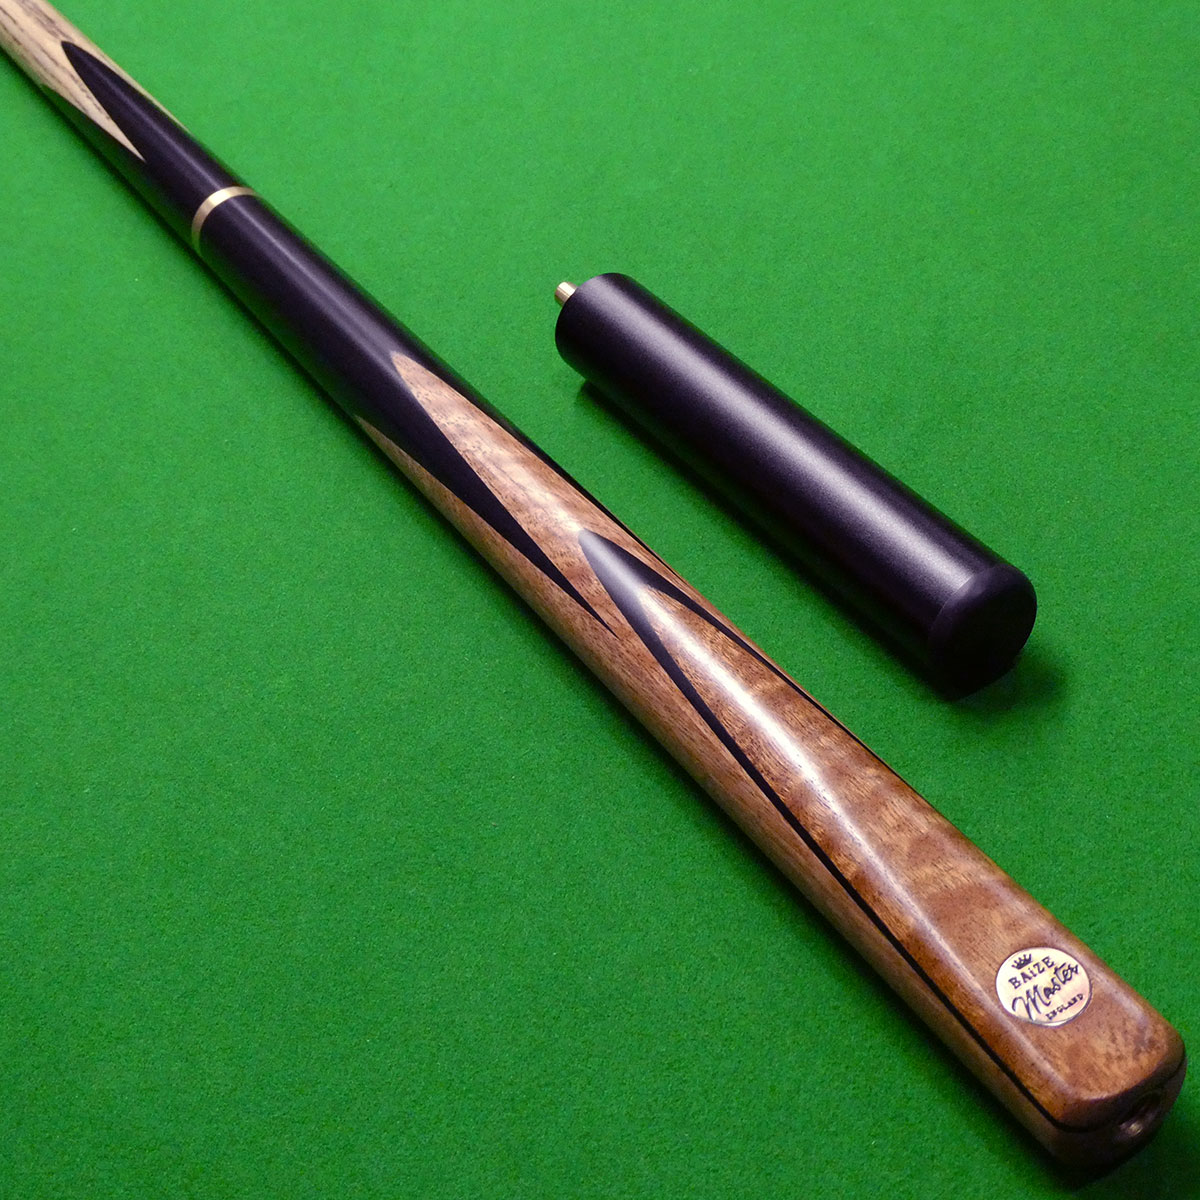 Mini Butt 3/4 Baize Master Gold Series G12 Hand Spliced Snooker Cue/Pool Cue